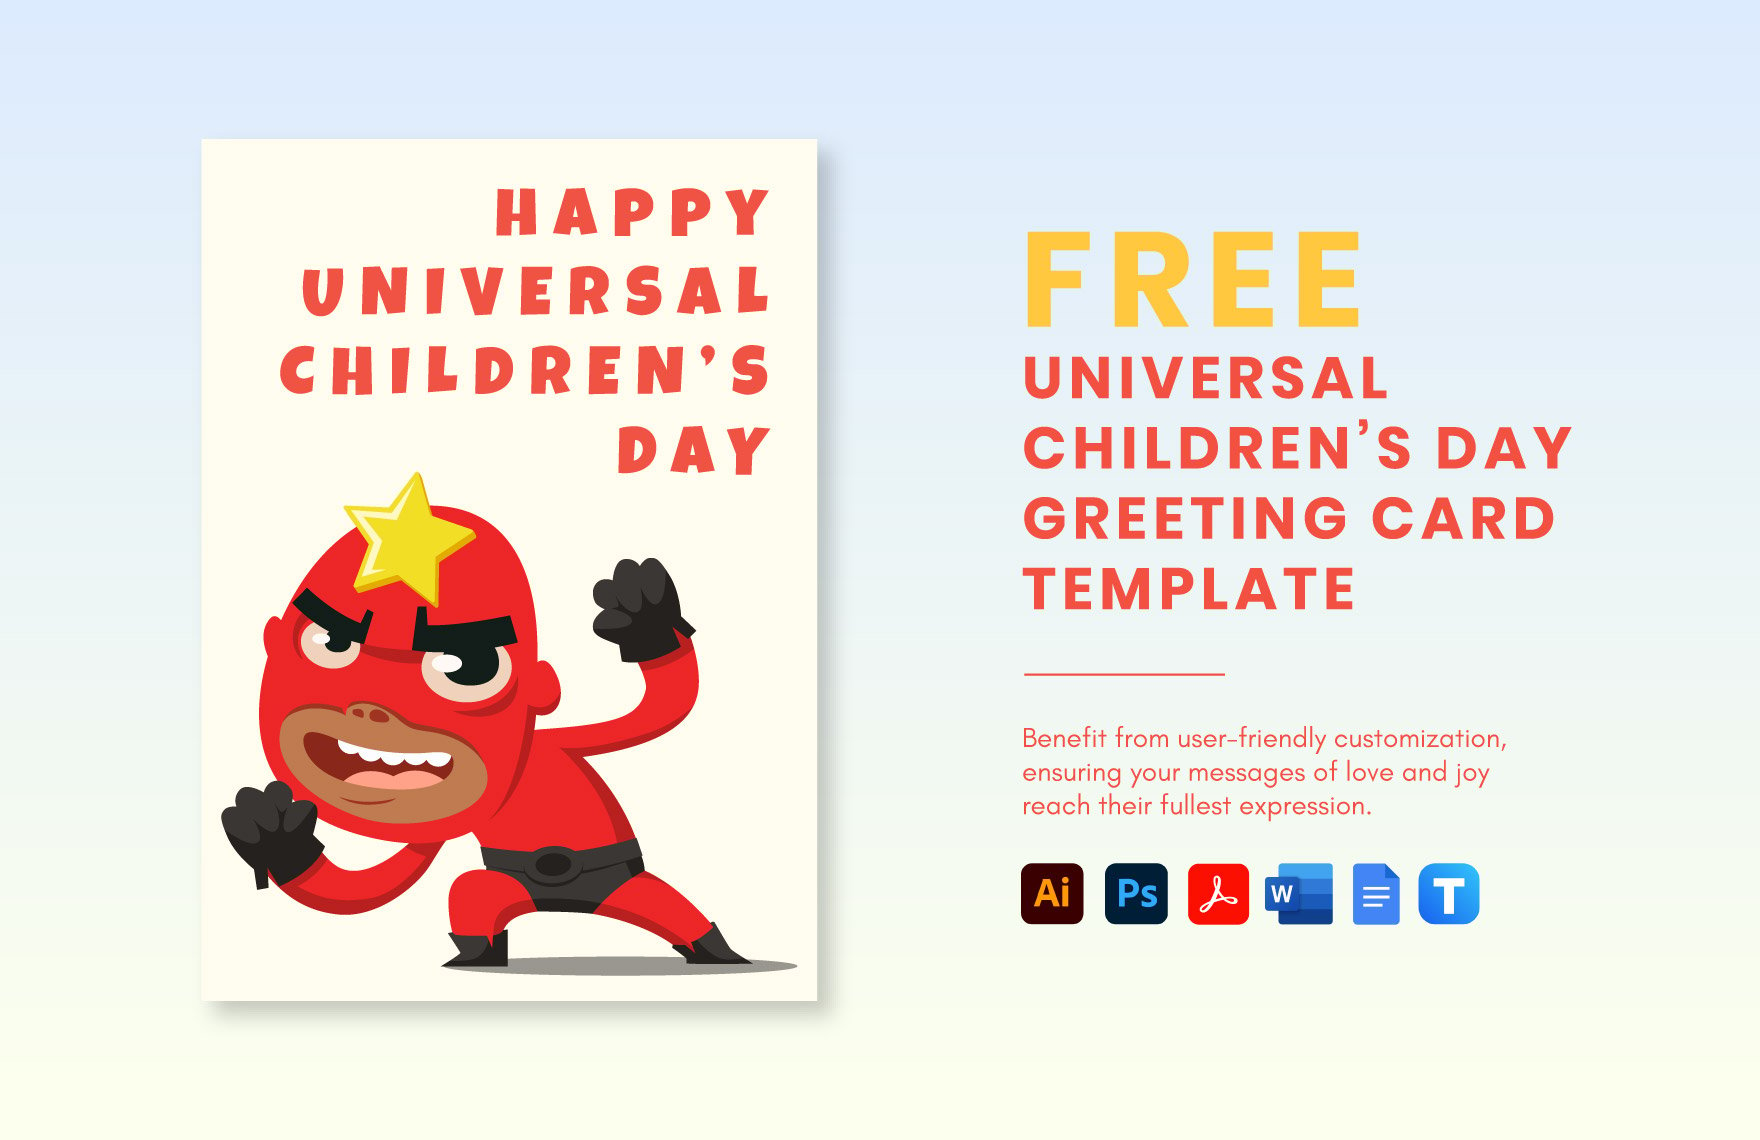 Universal Children’s Day Greeting Card Template